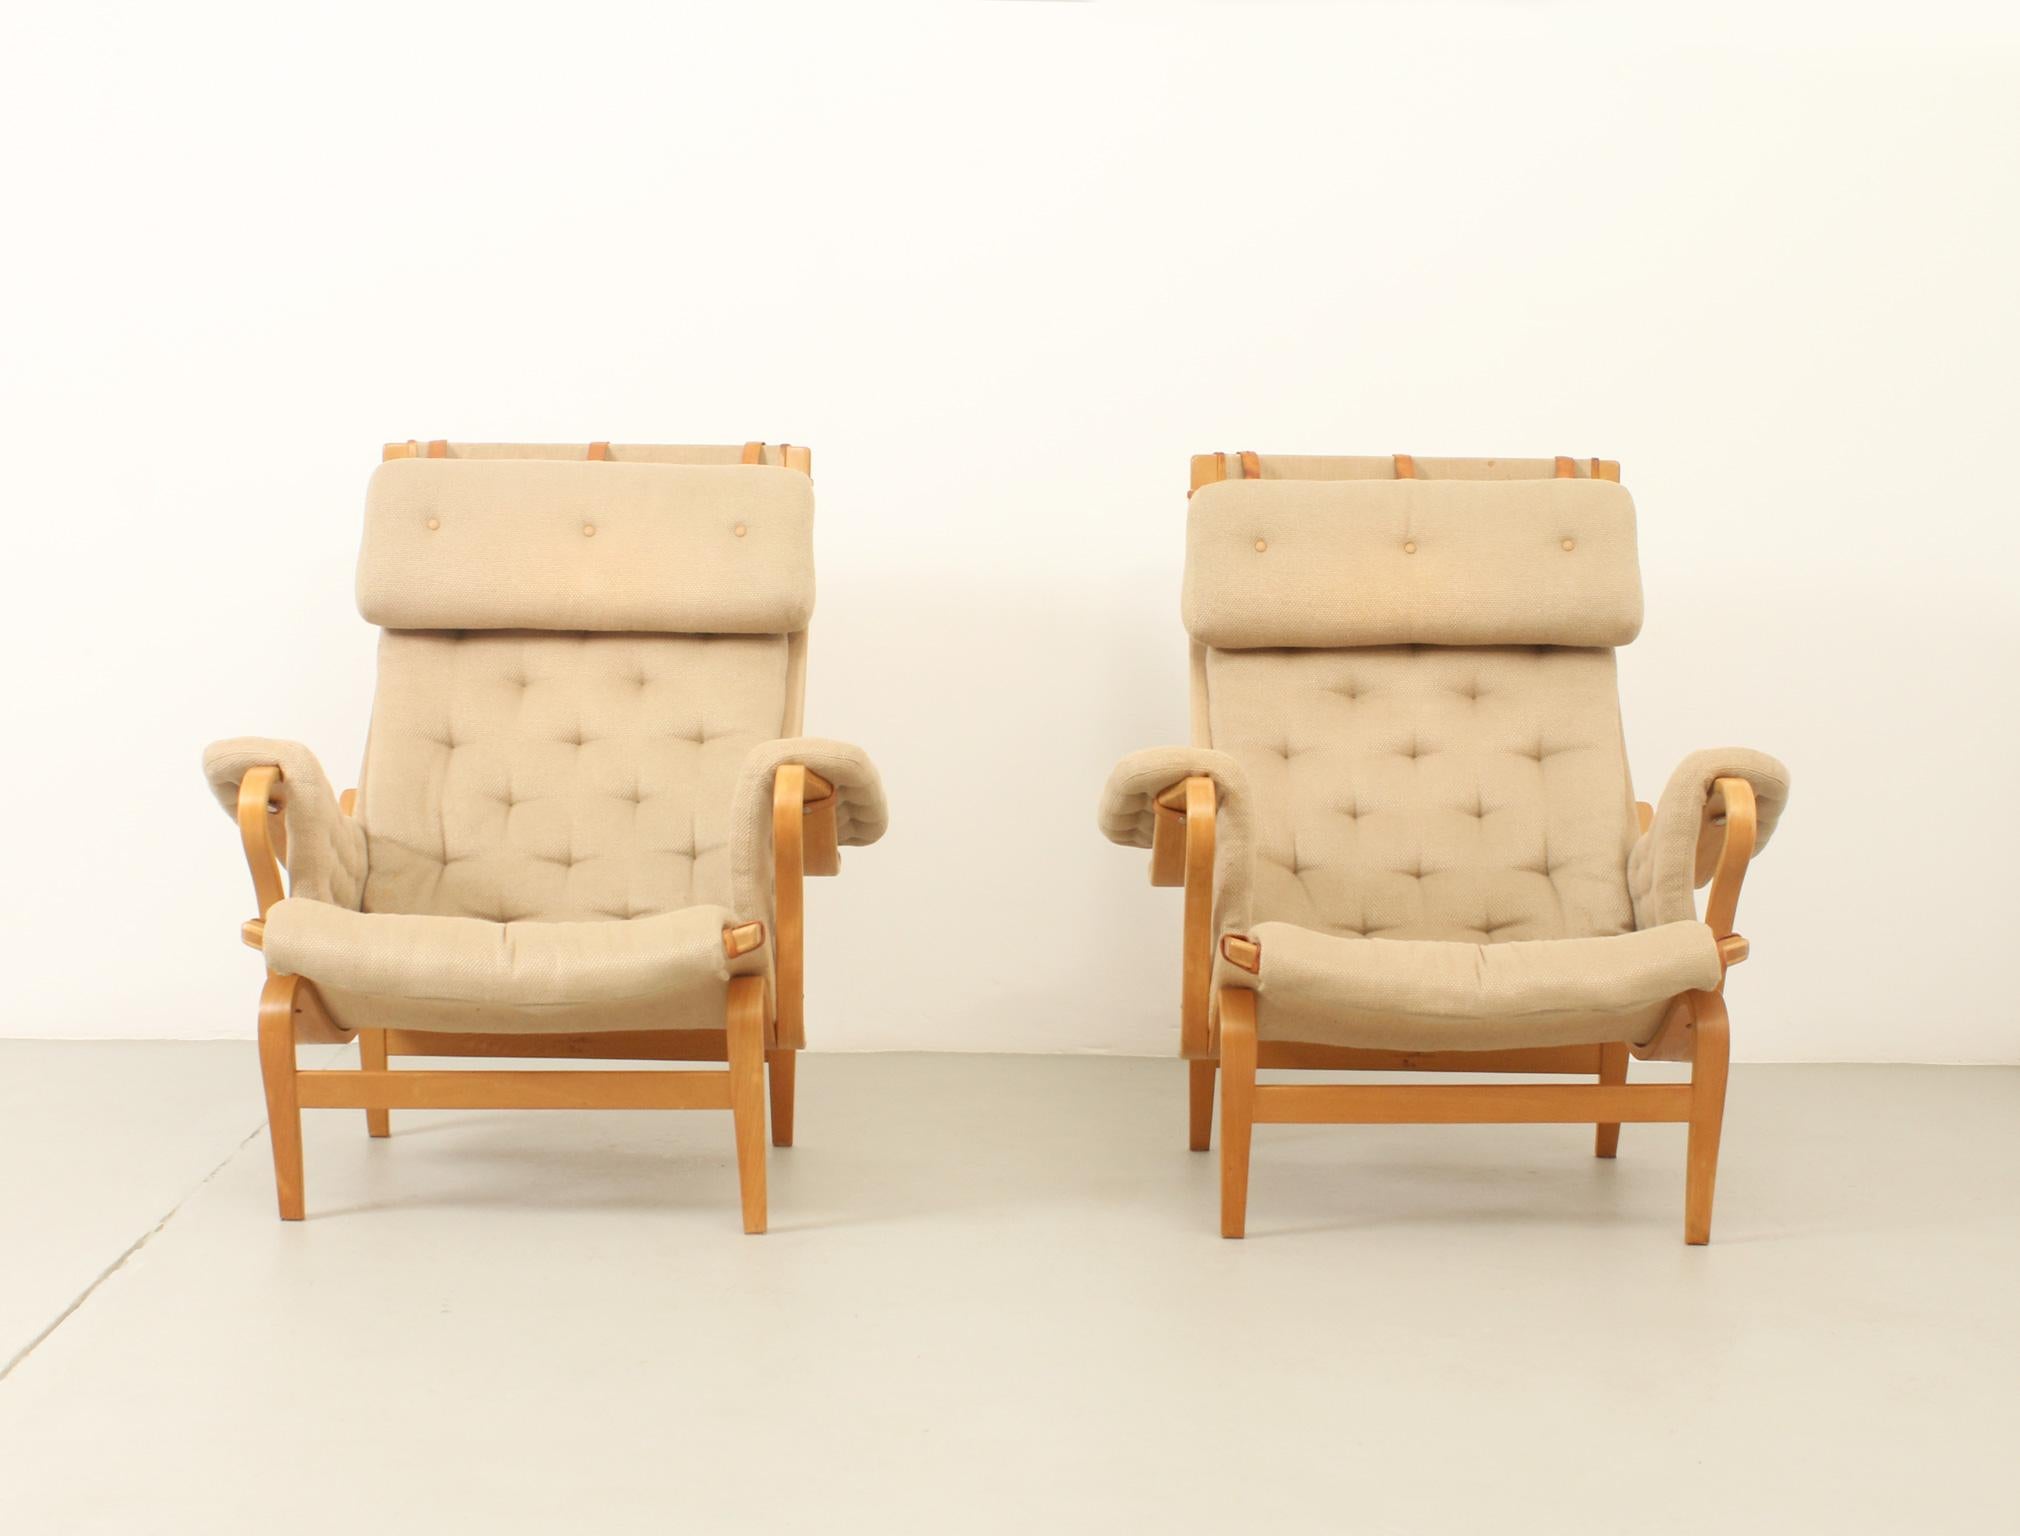 Scandinavian Modern Pair of Pernilla Armchairs by Bruno Mathsson for Dux, 1969 For Sale